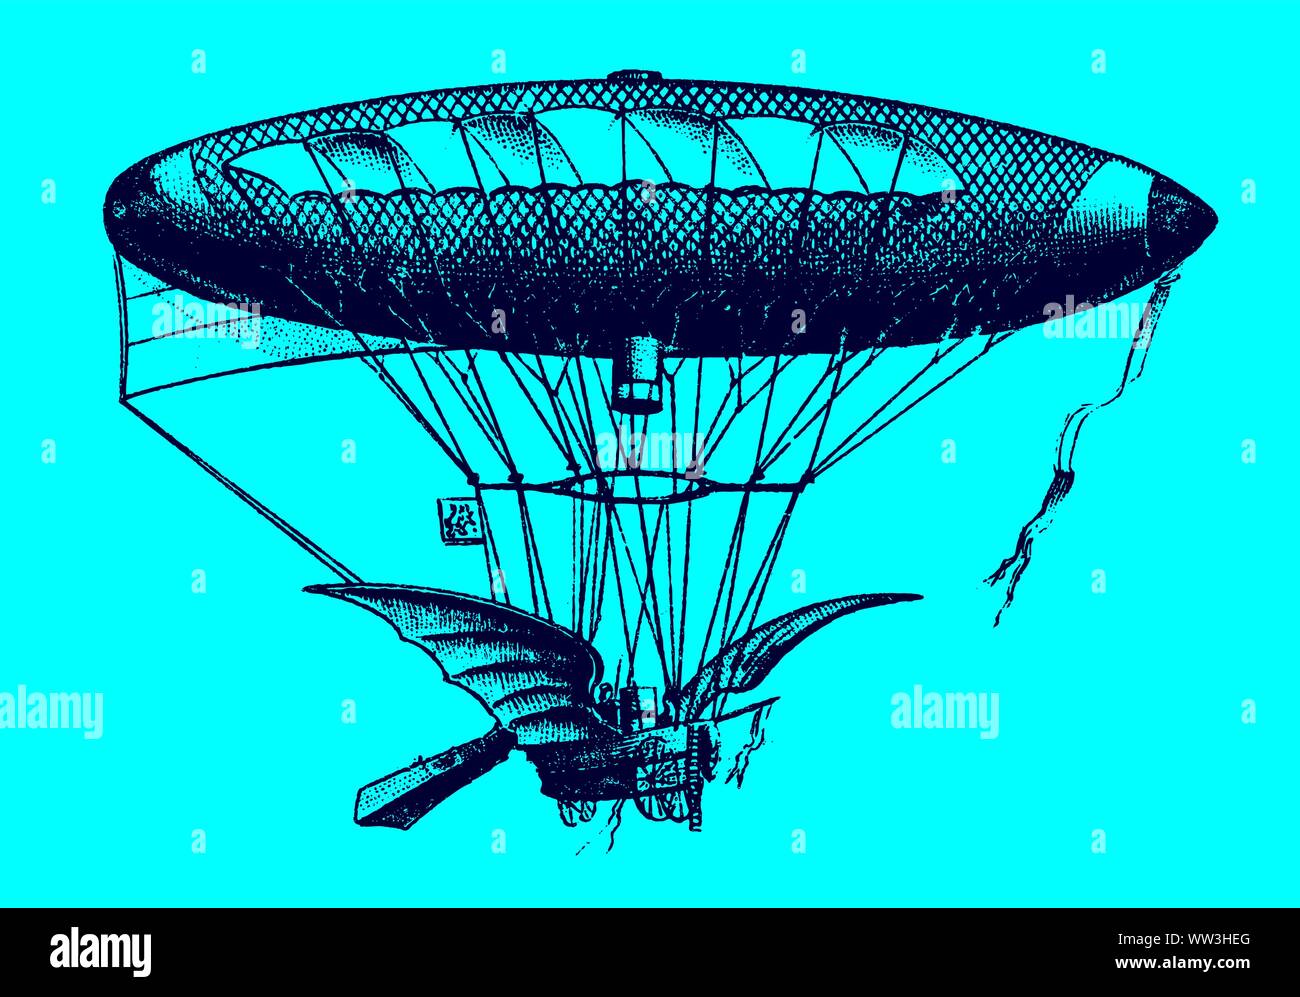 Historic flying airship with stearing device and two wings in front of a blue background. Illustration after a wood engraving from the 19th century Stock Vector